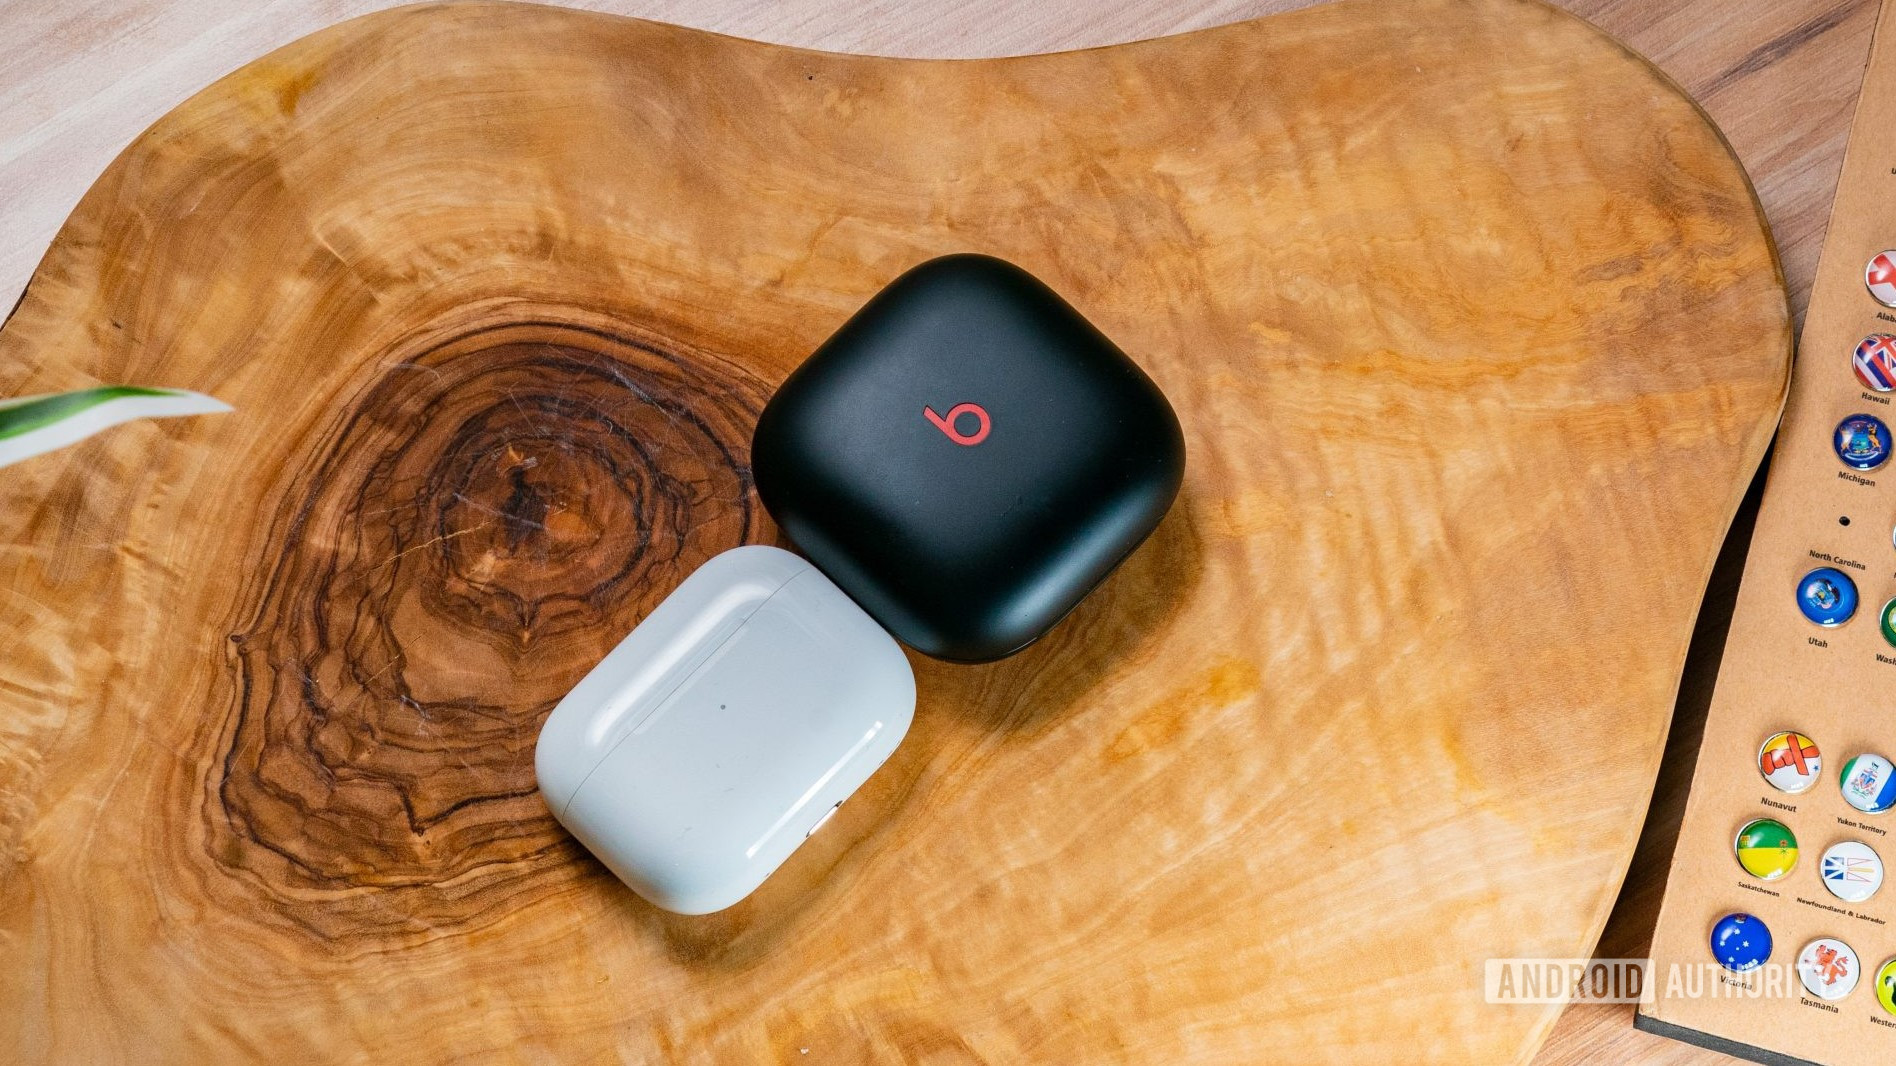 The Beats Fit Pro and AirPods Pro (2nd generation) cases side by side on a wood surface.